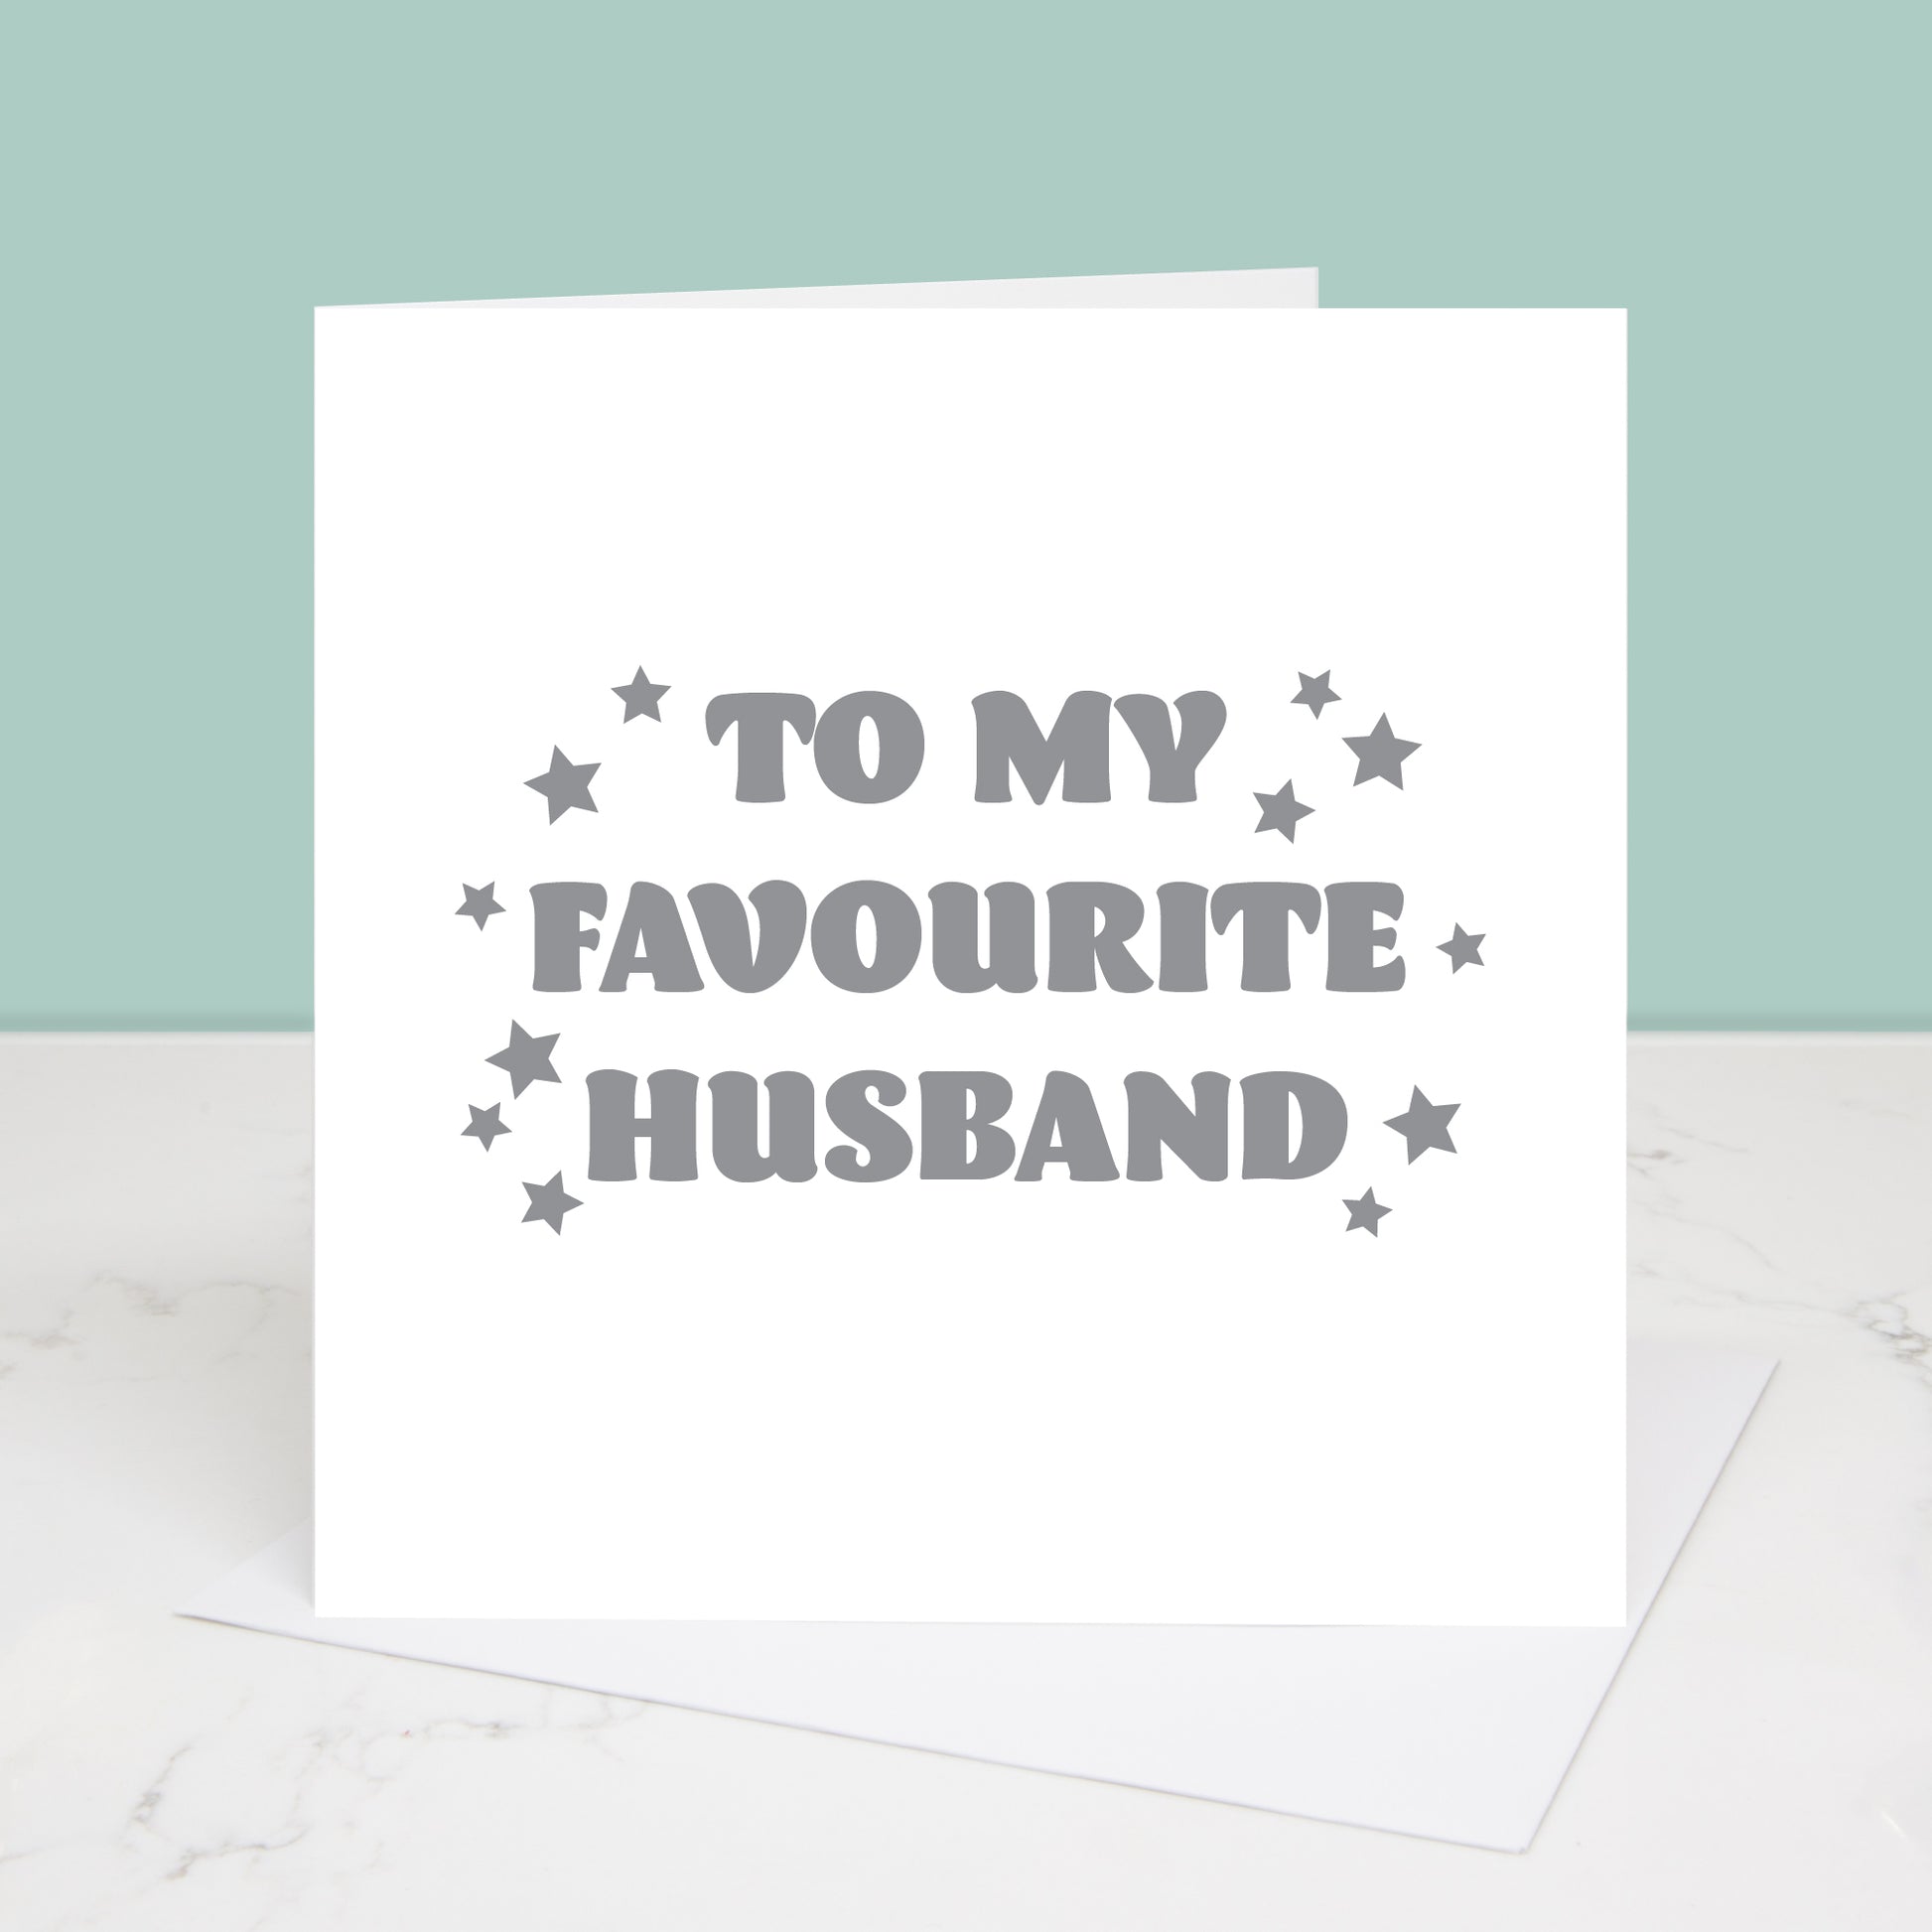 To My Favourite Husband Valentine's Day Card in grey.  All images and designs © Slice of Pie Designs